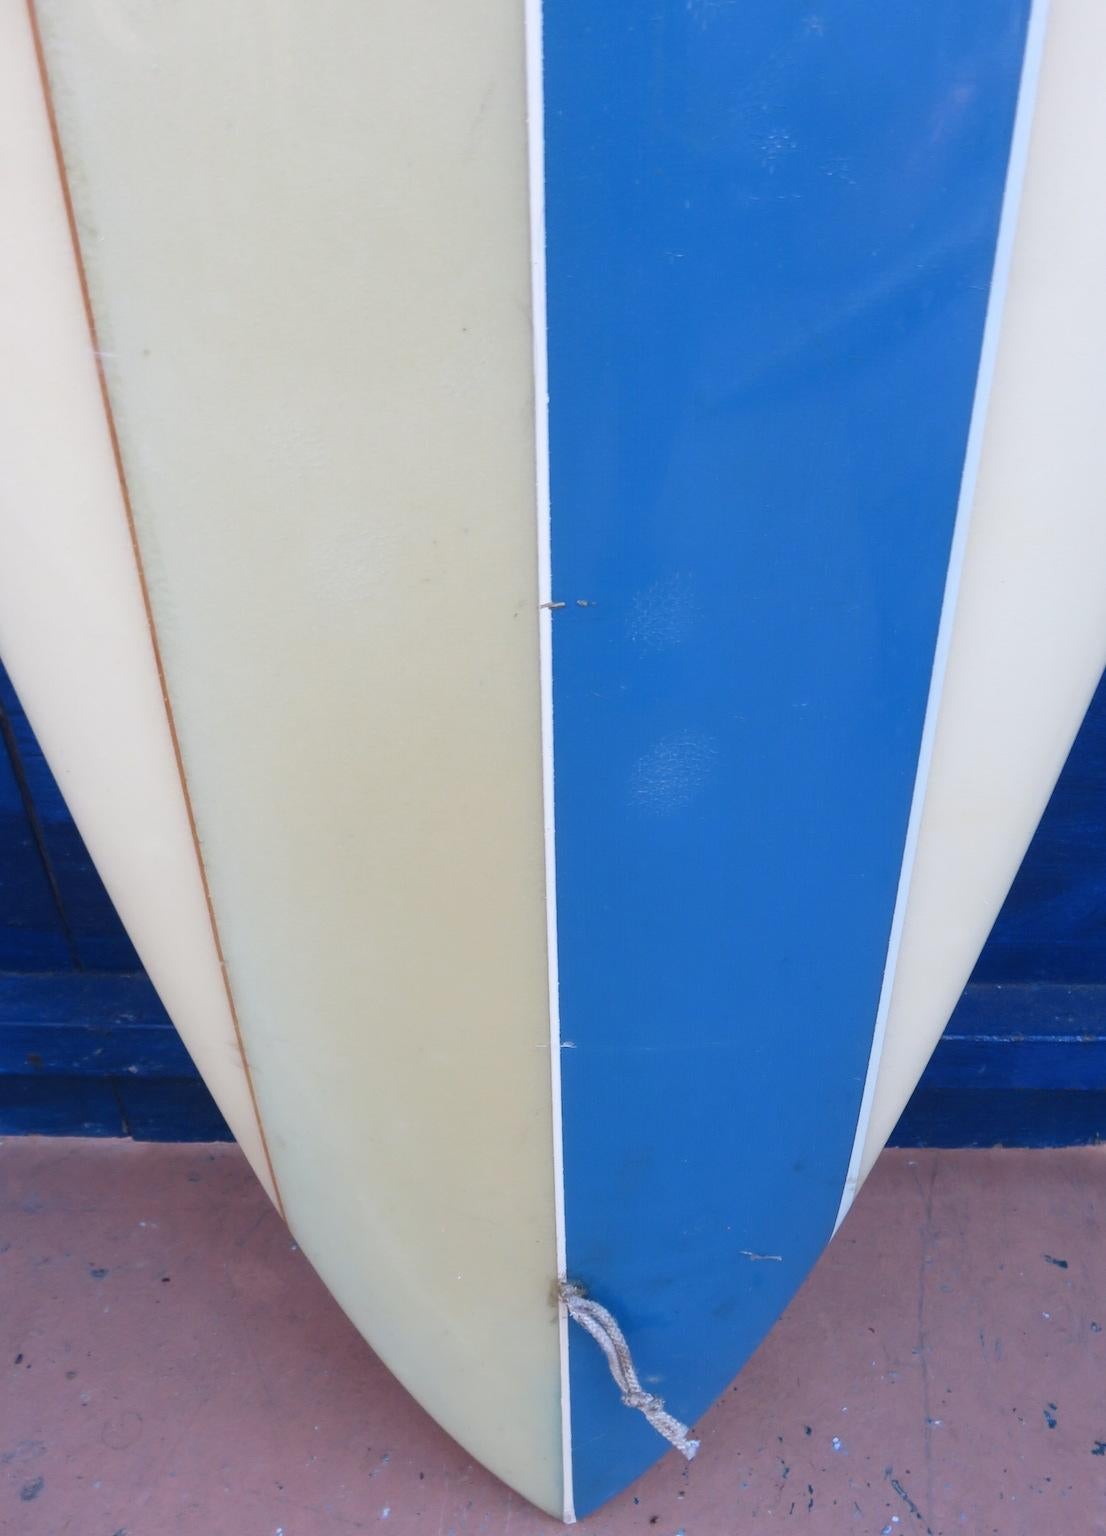 70s surfboards